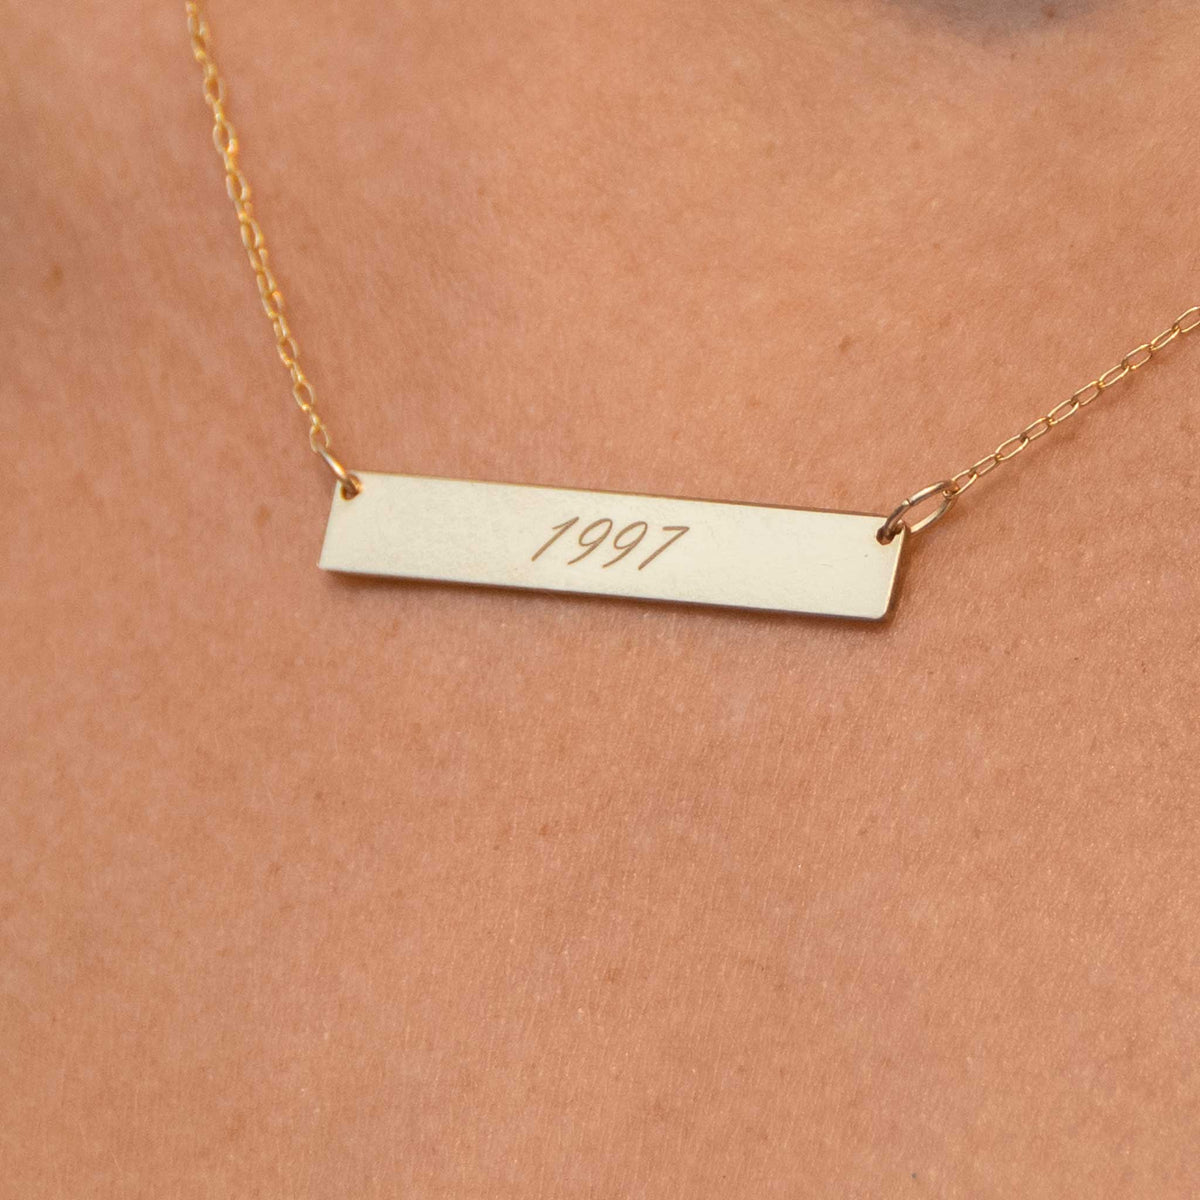 A very close up of the rectangle bar necklace in gold color with 1997 engraved in script font. 